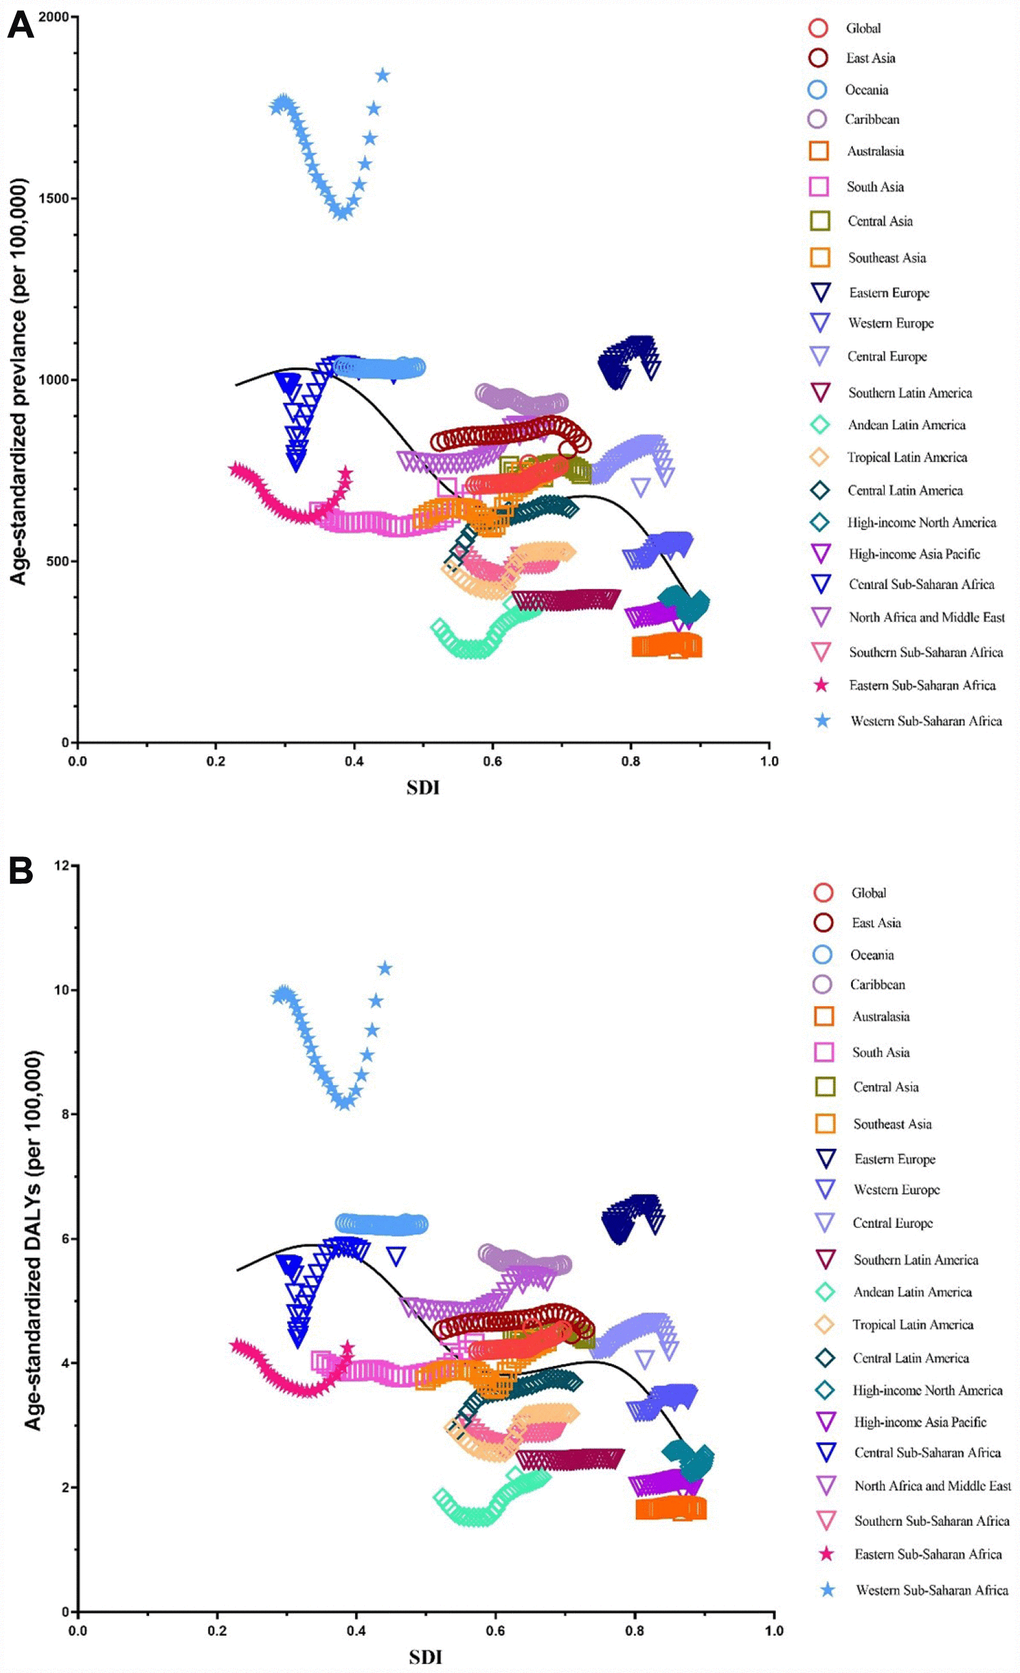 Co-evolution of age-standardized burden estimates with SDI globally and for GBD regions for male infertility 1990–2017. (A) Prevalence (B) DALYs. Colored lines show global and region values for age-standardized burden estimates rates. Each point in a line represents 1 year starting at 1990 and ending at 2017. The black line represents the average expected relationship between SDI and burden estimates rates for male infertility based on values from each region in the 1990–2017 estimation period. DALYs = disability-adjusted life-years. SDI = Socio-demographic Index.